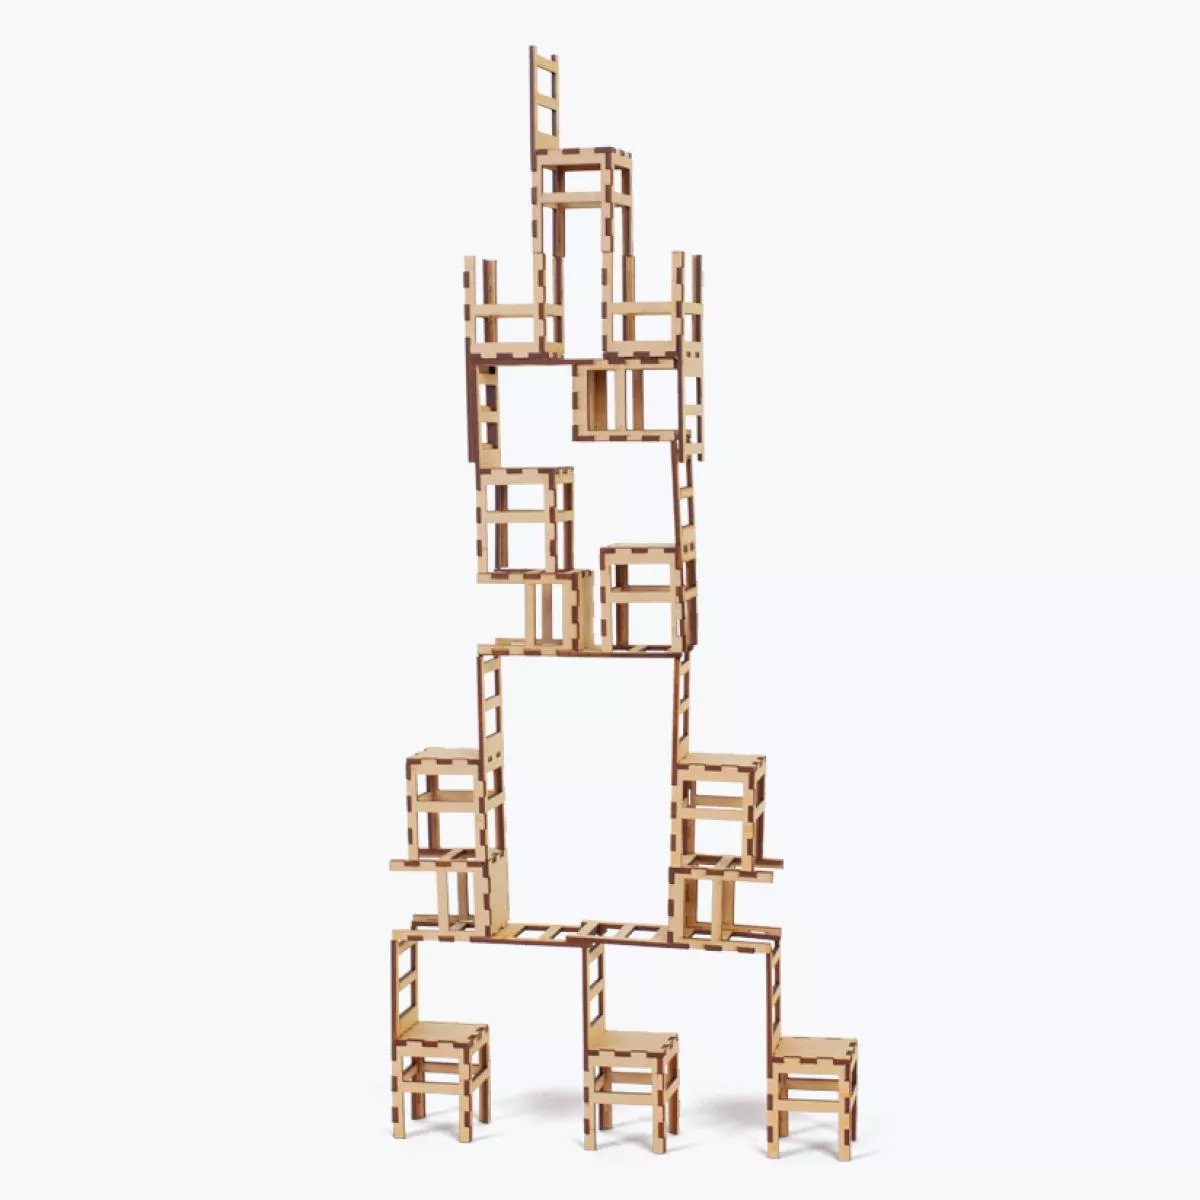 Artistic Stacking Game with 29 Wooden Chairs